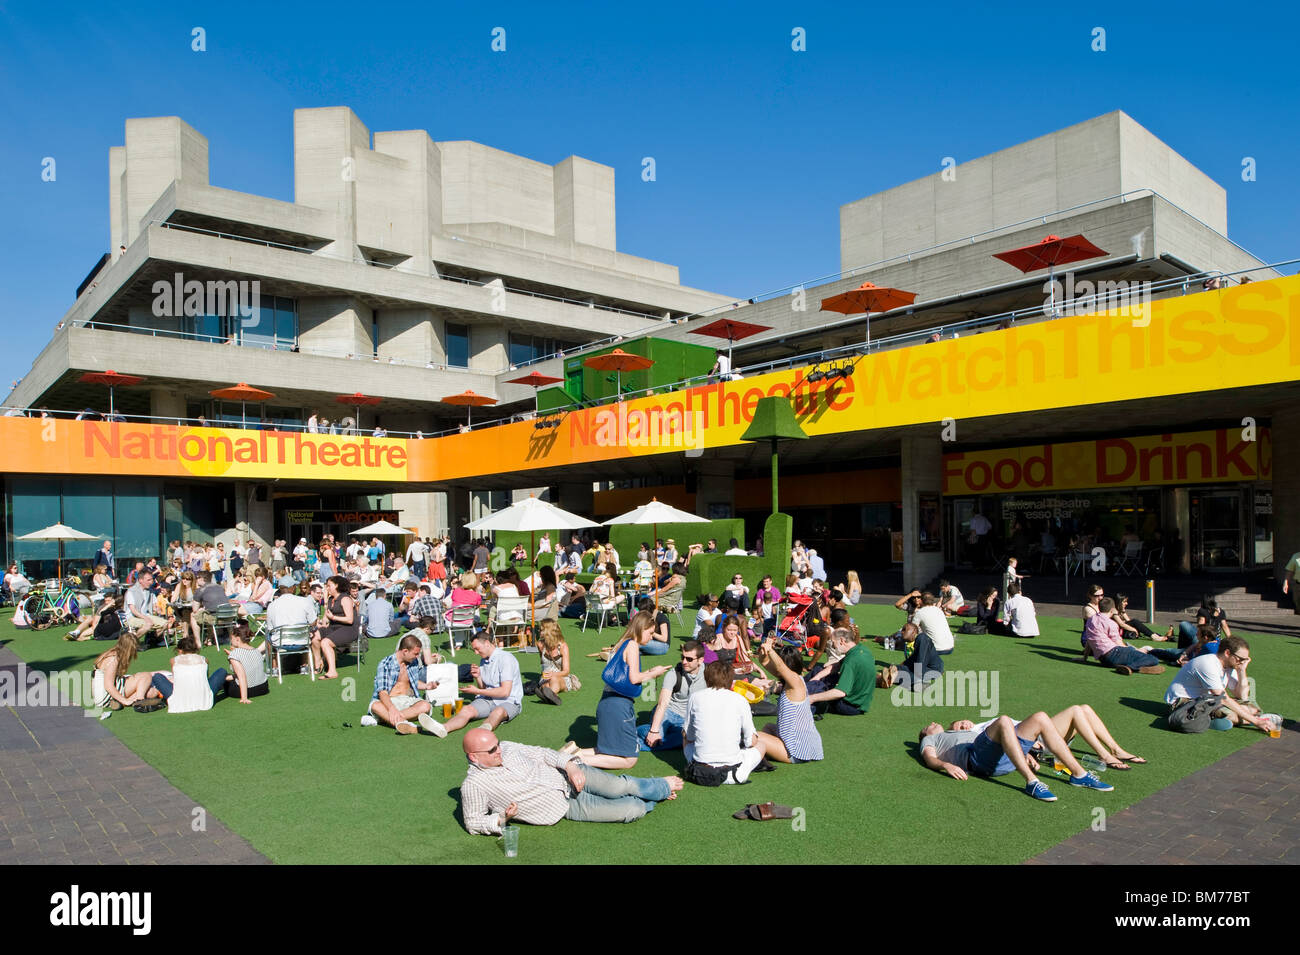 People enjoy hot summer day by Royal National Theatre, Southbank, London, United Kingdom Stock Photo